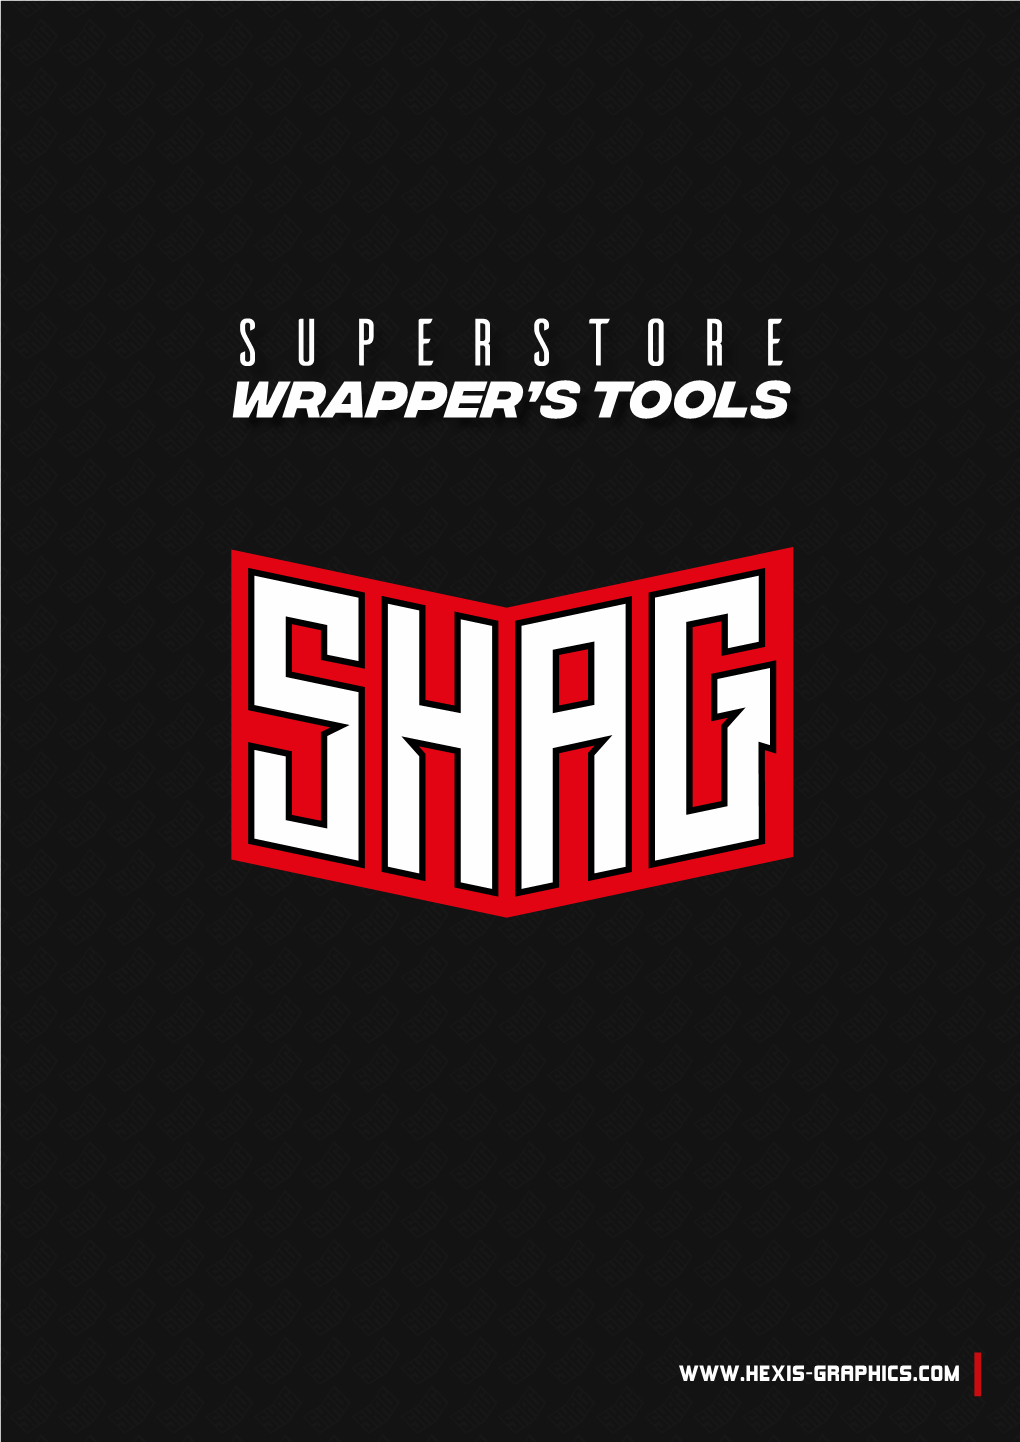 Superstore Wrapper’S Tools the New Wrapper’S Buddy